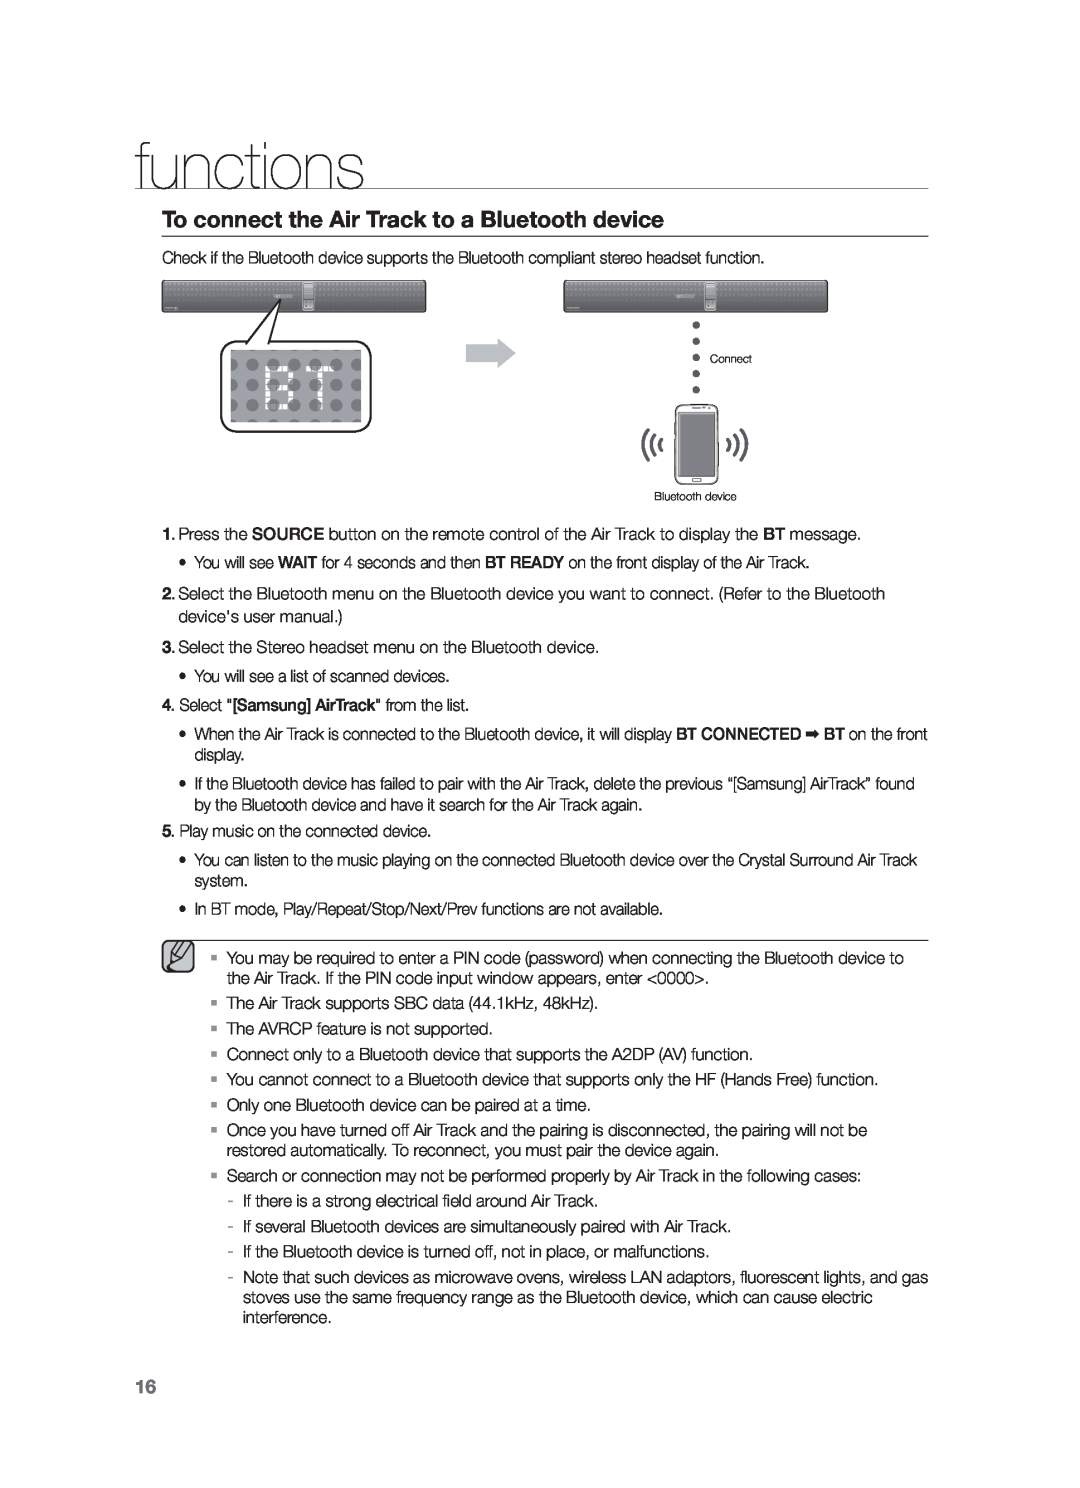 Samsung HW-F751/TK, HW-F751/XN, HW-F751/EN manual To connect the Air Track to a Bluetooth device, functions 